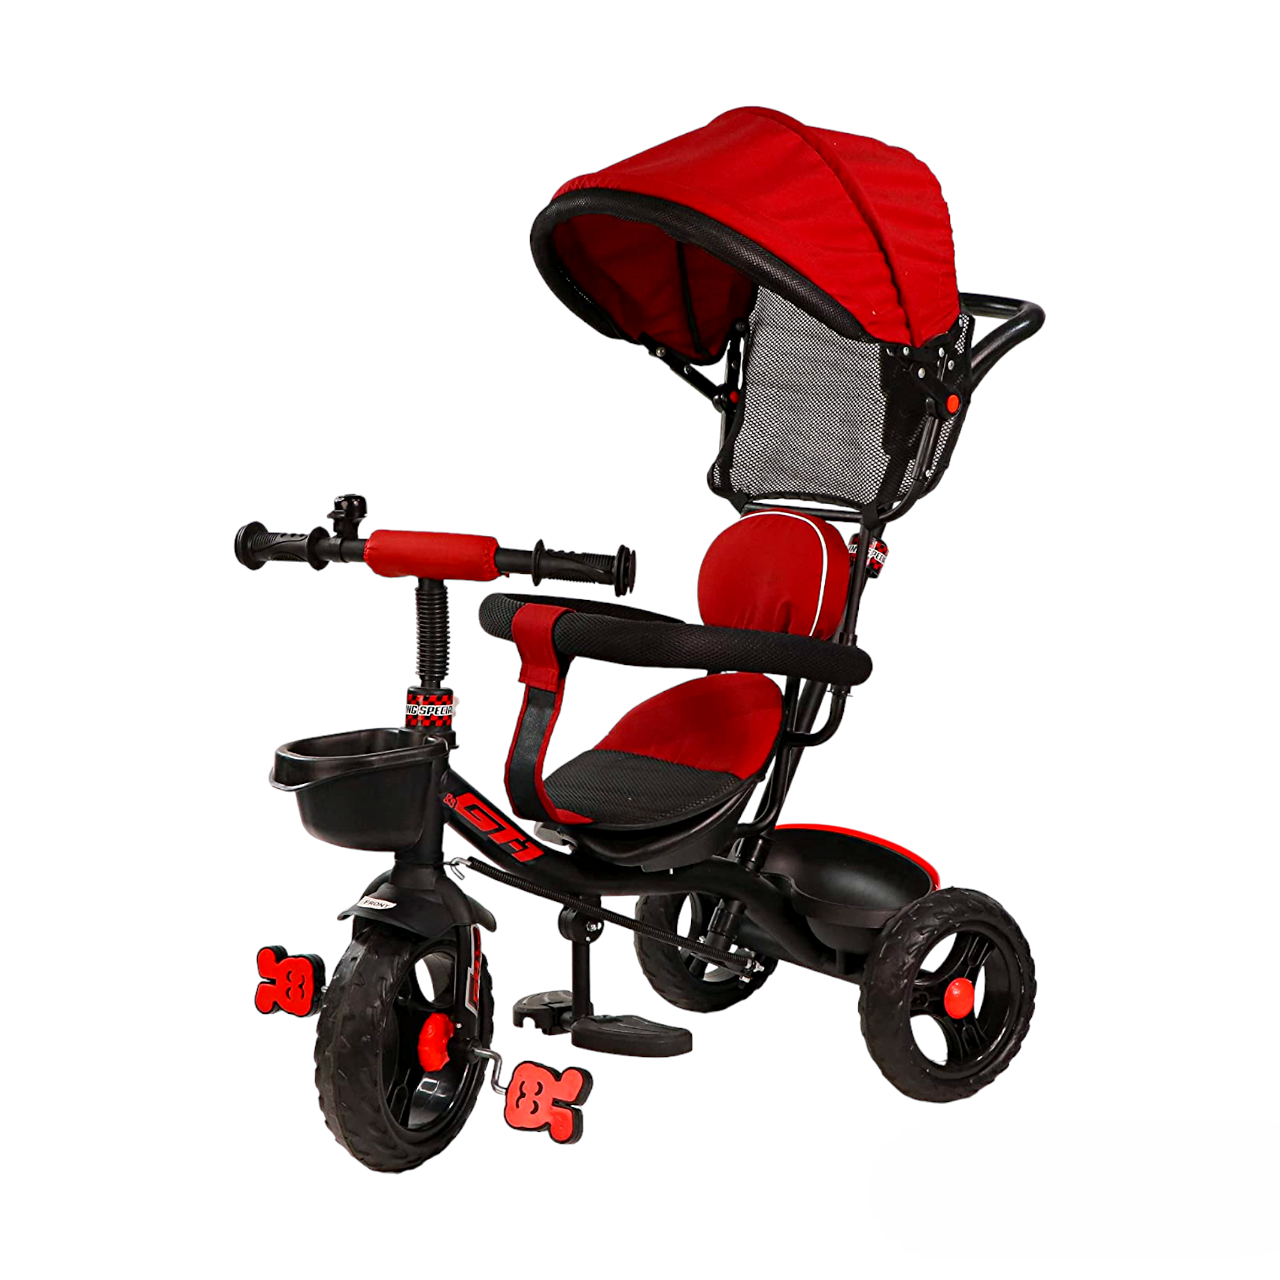 Luusa GT 500 Hooded Tricycle for kids Plug N Play Baby cycle with Parental Control Red